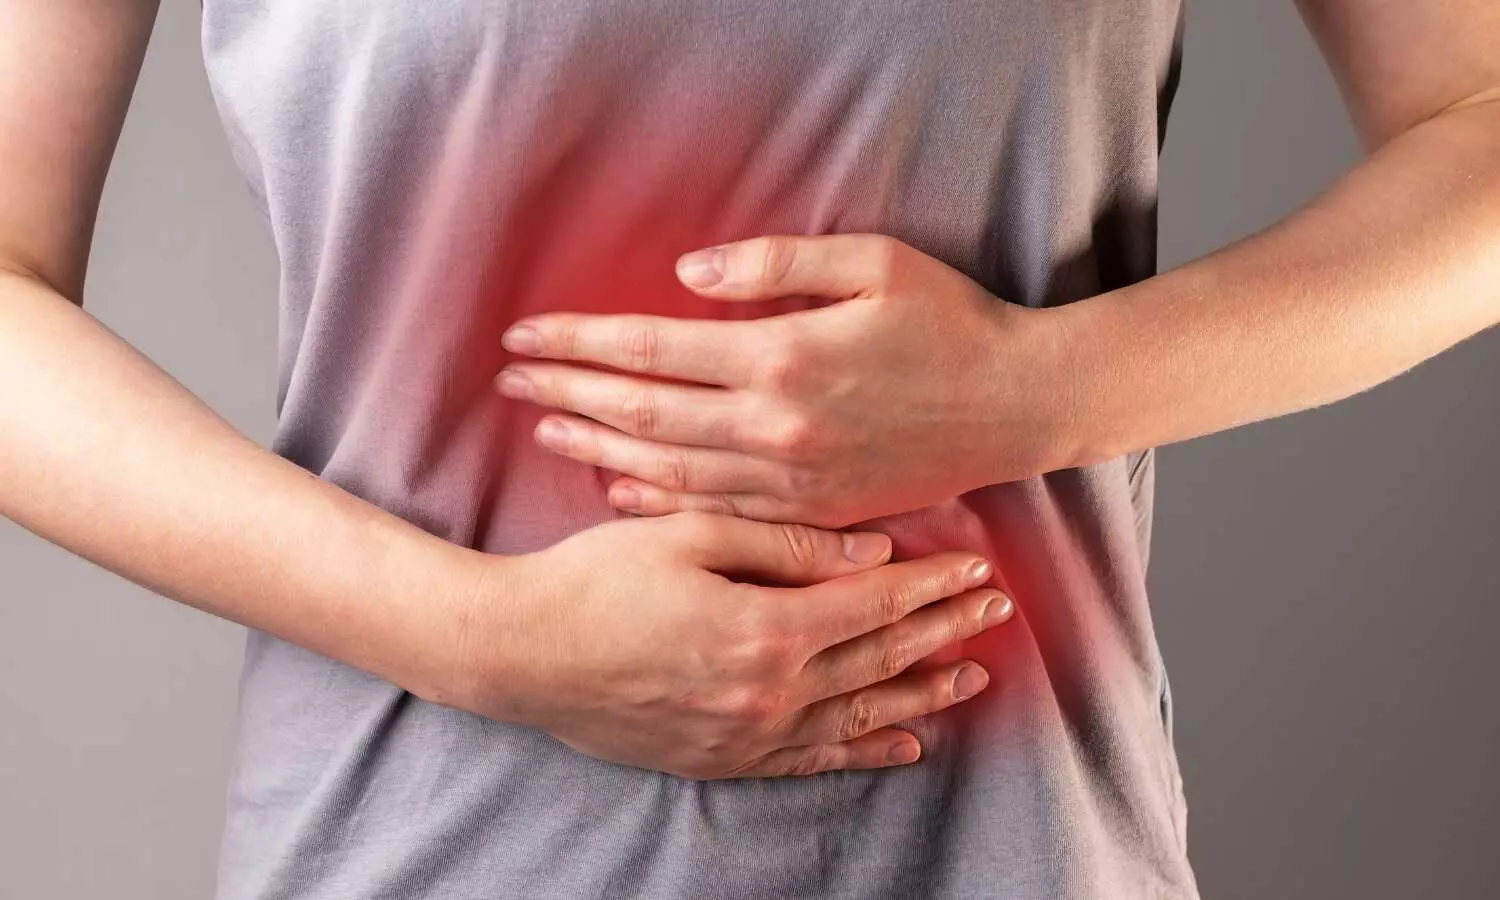 COVID-19 associated with increased risk to develop gastrointestinal disorders